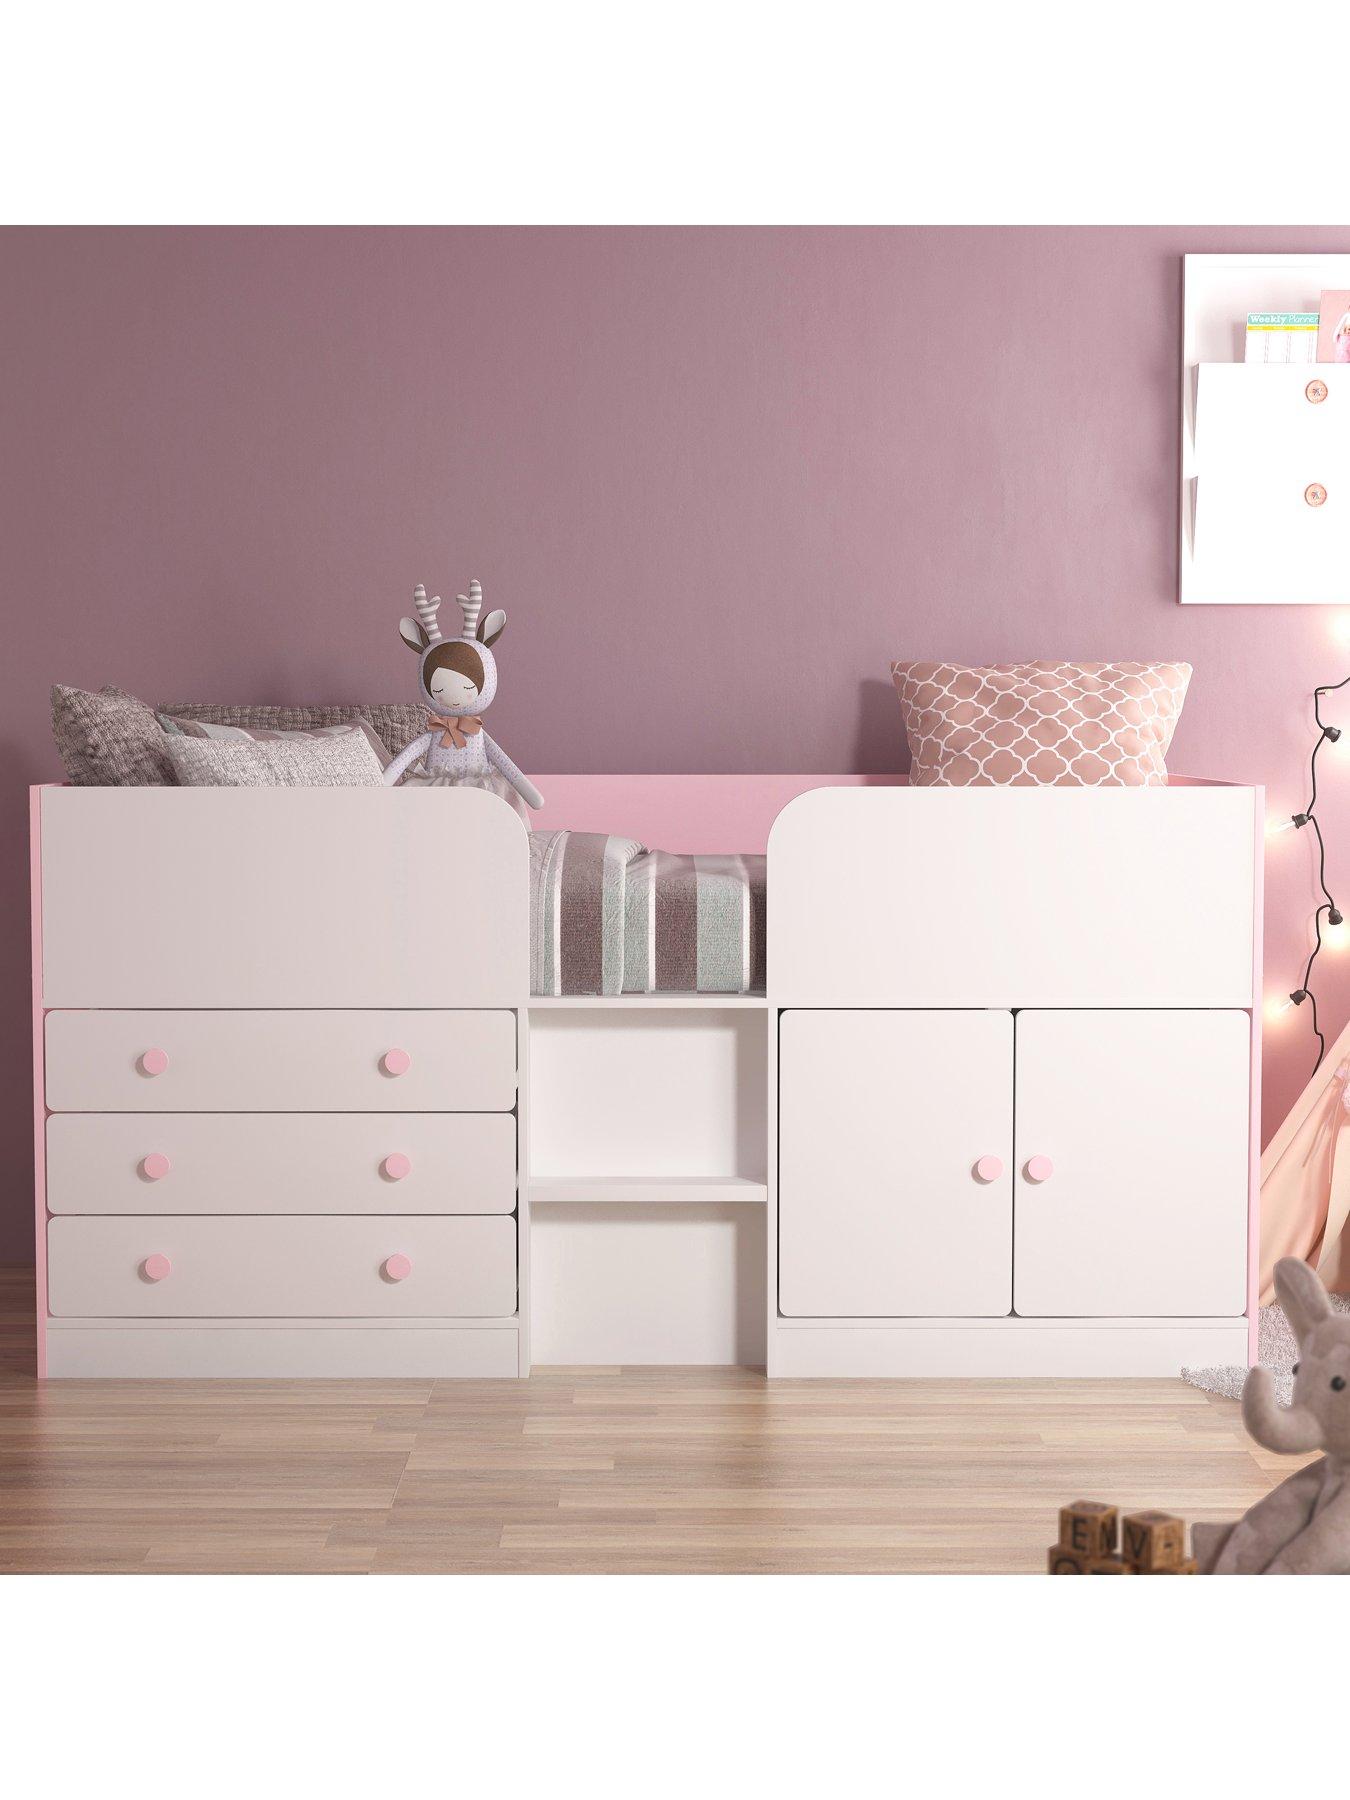 cabin bed with drawers